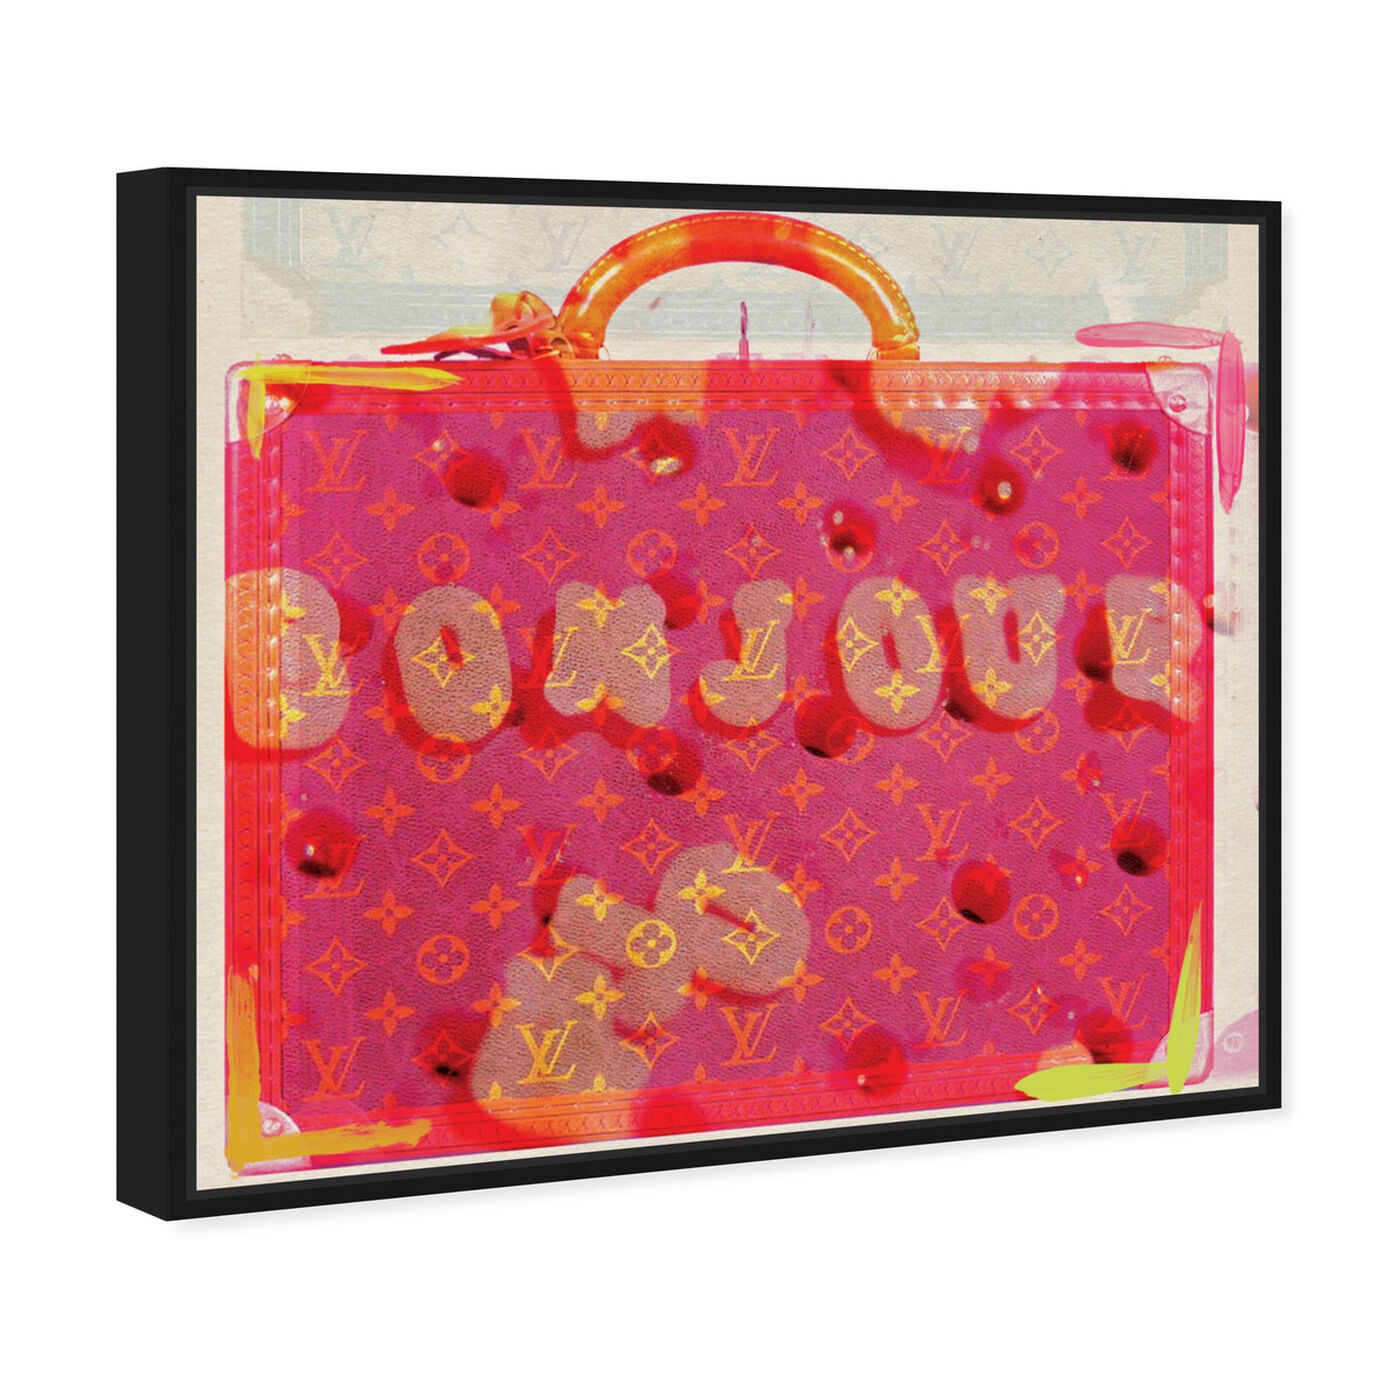 Angled view of Bonjour featuring fashion and glam and handbags art.